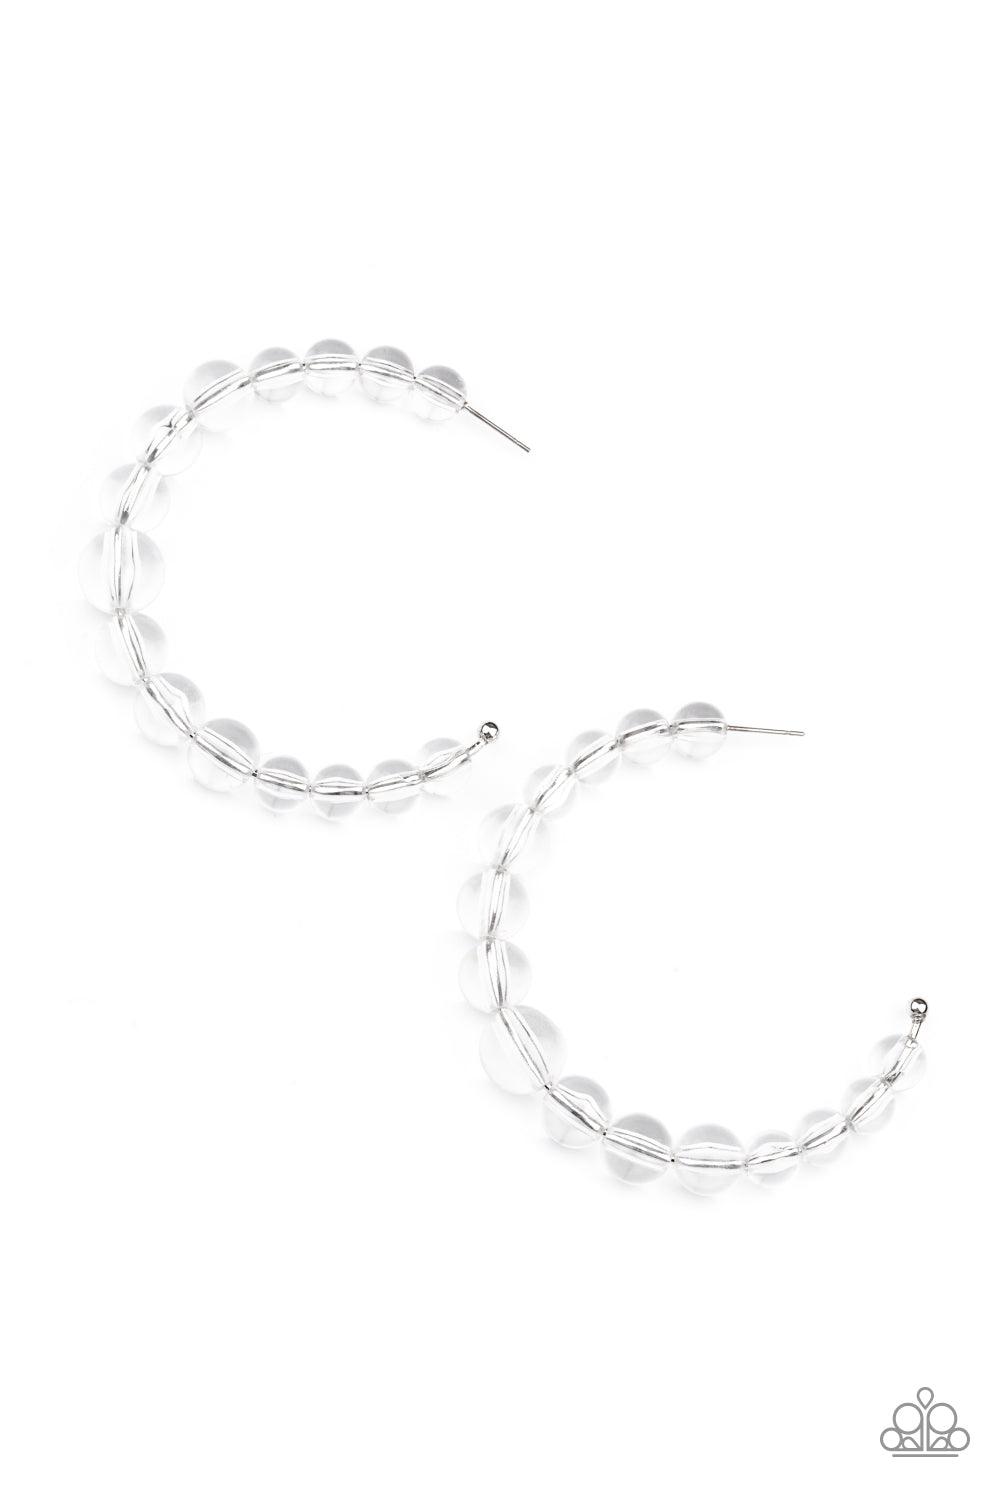 Paparazzi Accessories In The Clear - White Gradually increasing in size at the center, a glassy collection of white beads are threaded along an oversized hoop for a bubbly effect. Earring attaches to a standard post fitting. Hoop measure approximately 2 1